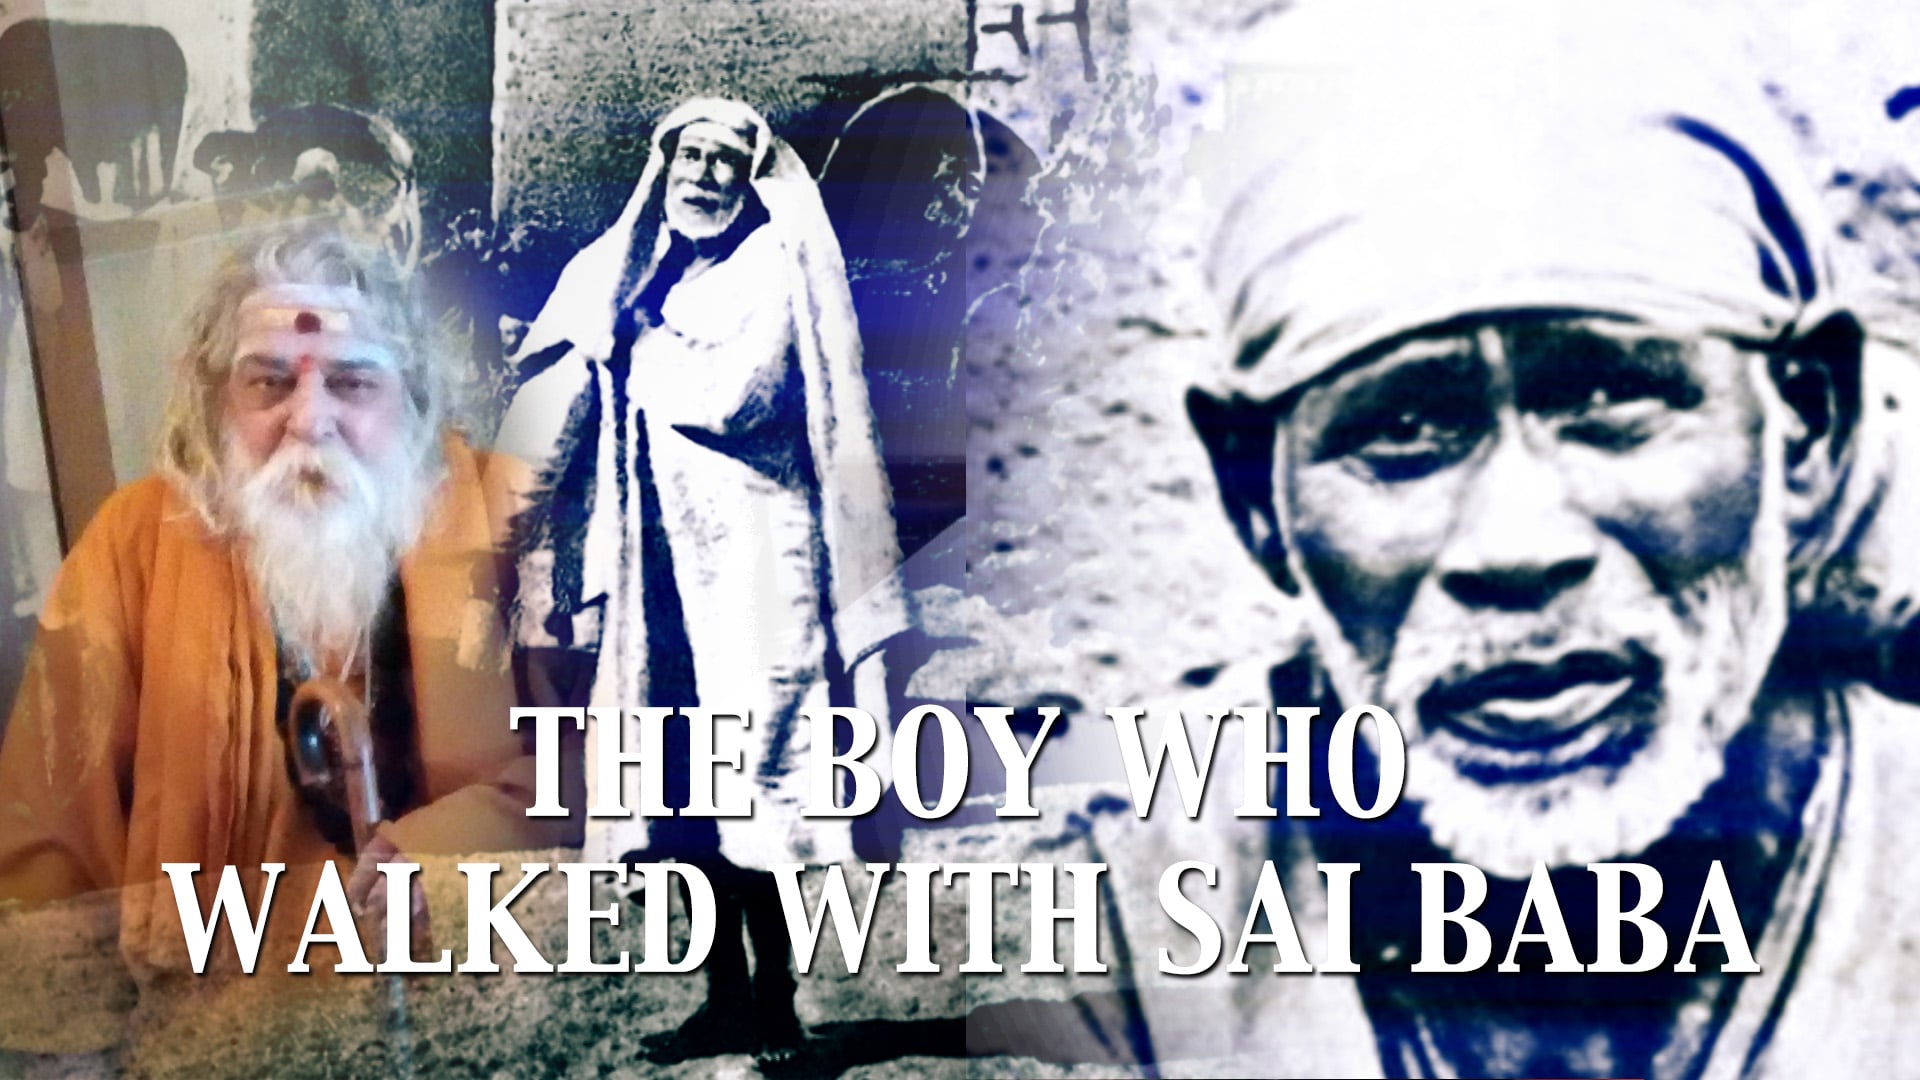 The Boy who walked with Sai Baba